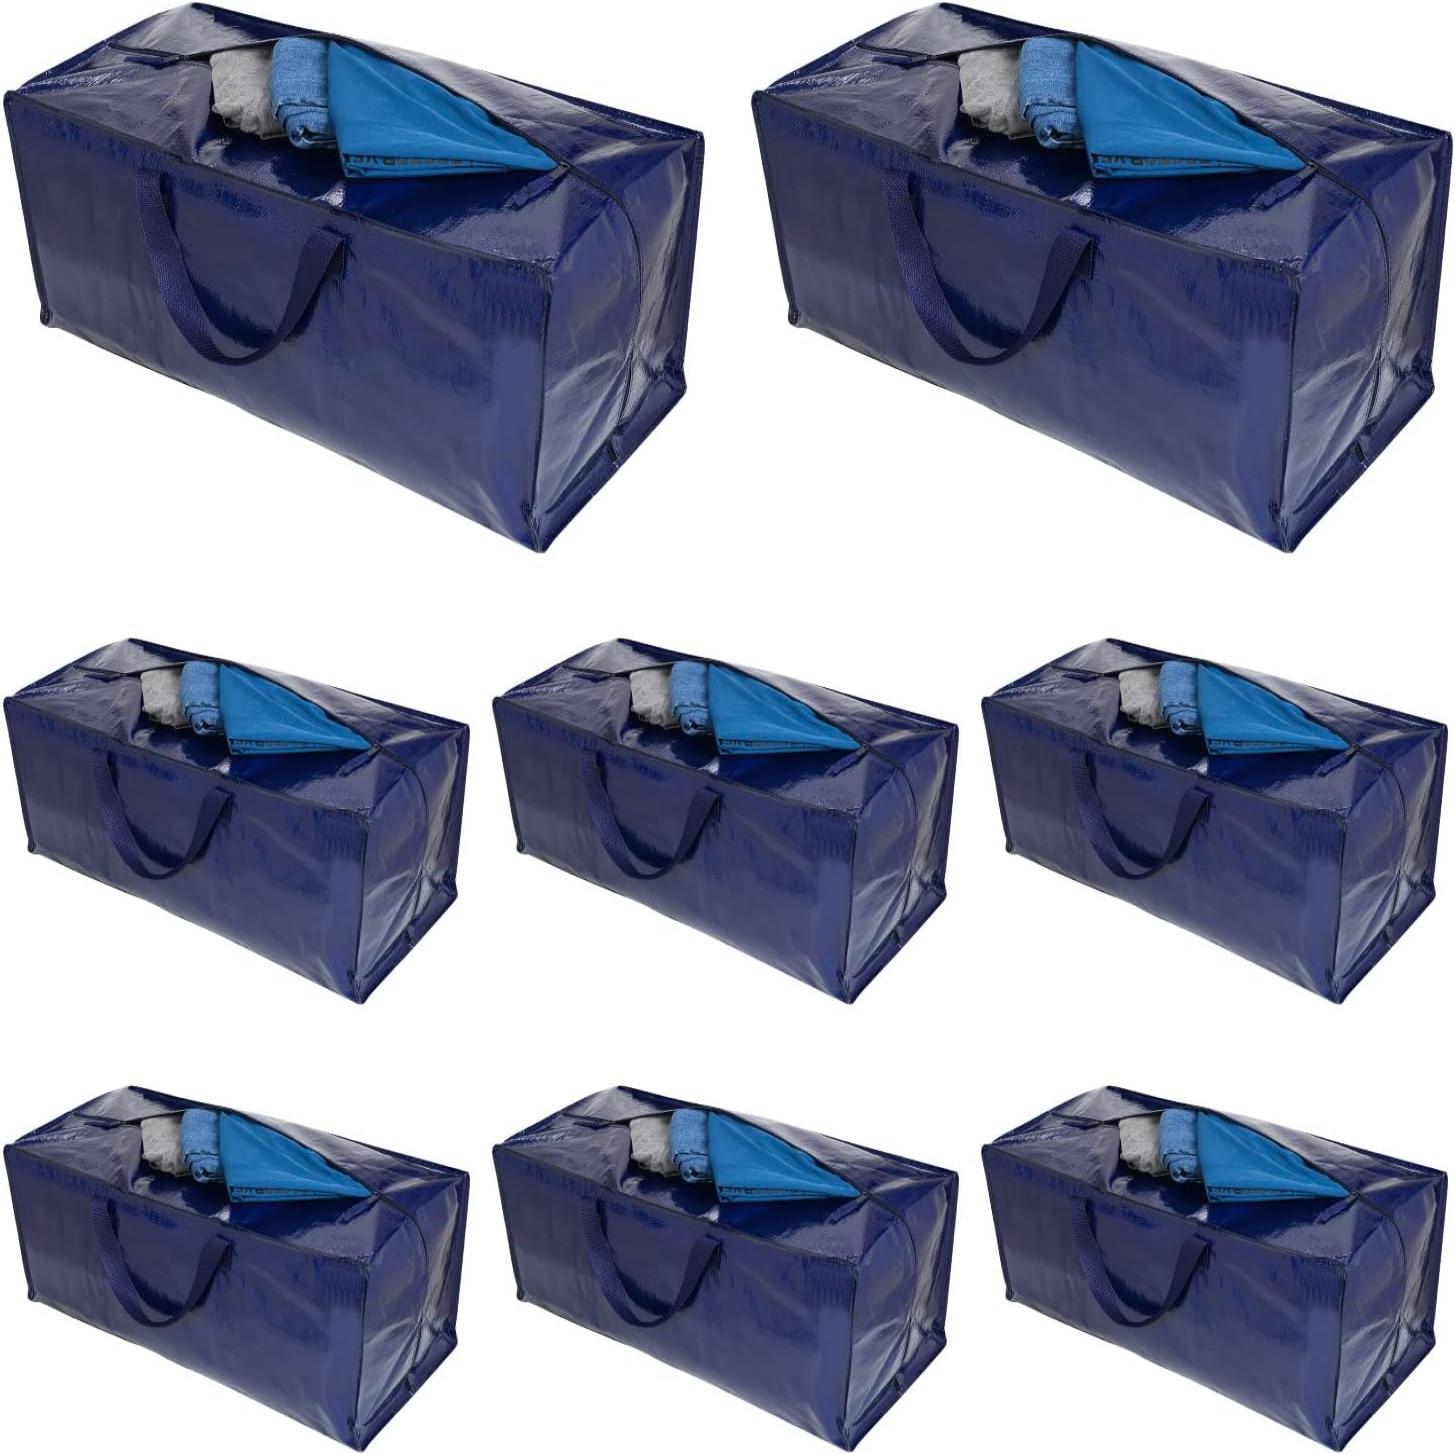 AlexHome Moving Bags Heavy Duty,Extra Large Packing Bags for Moving,Reusable Plastic Moving Totes,Clothes Storage Containers,Moving Supplies Bins